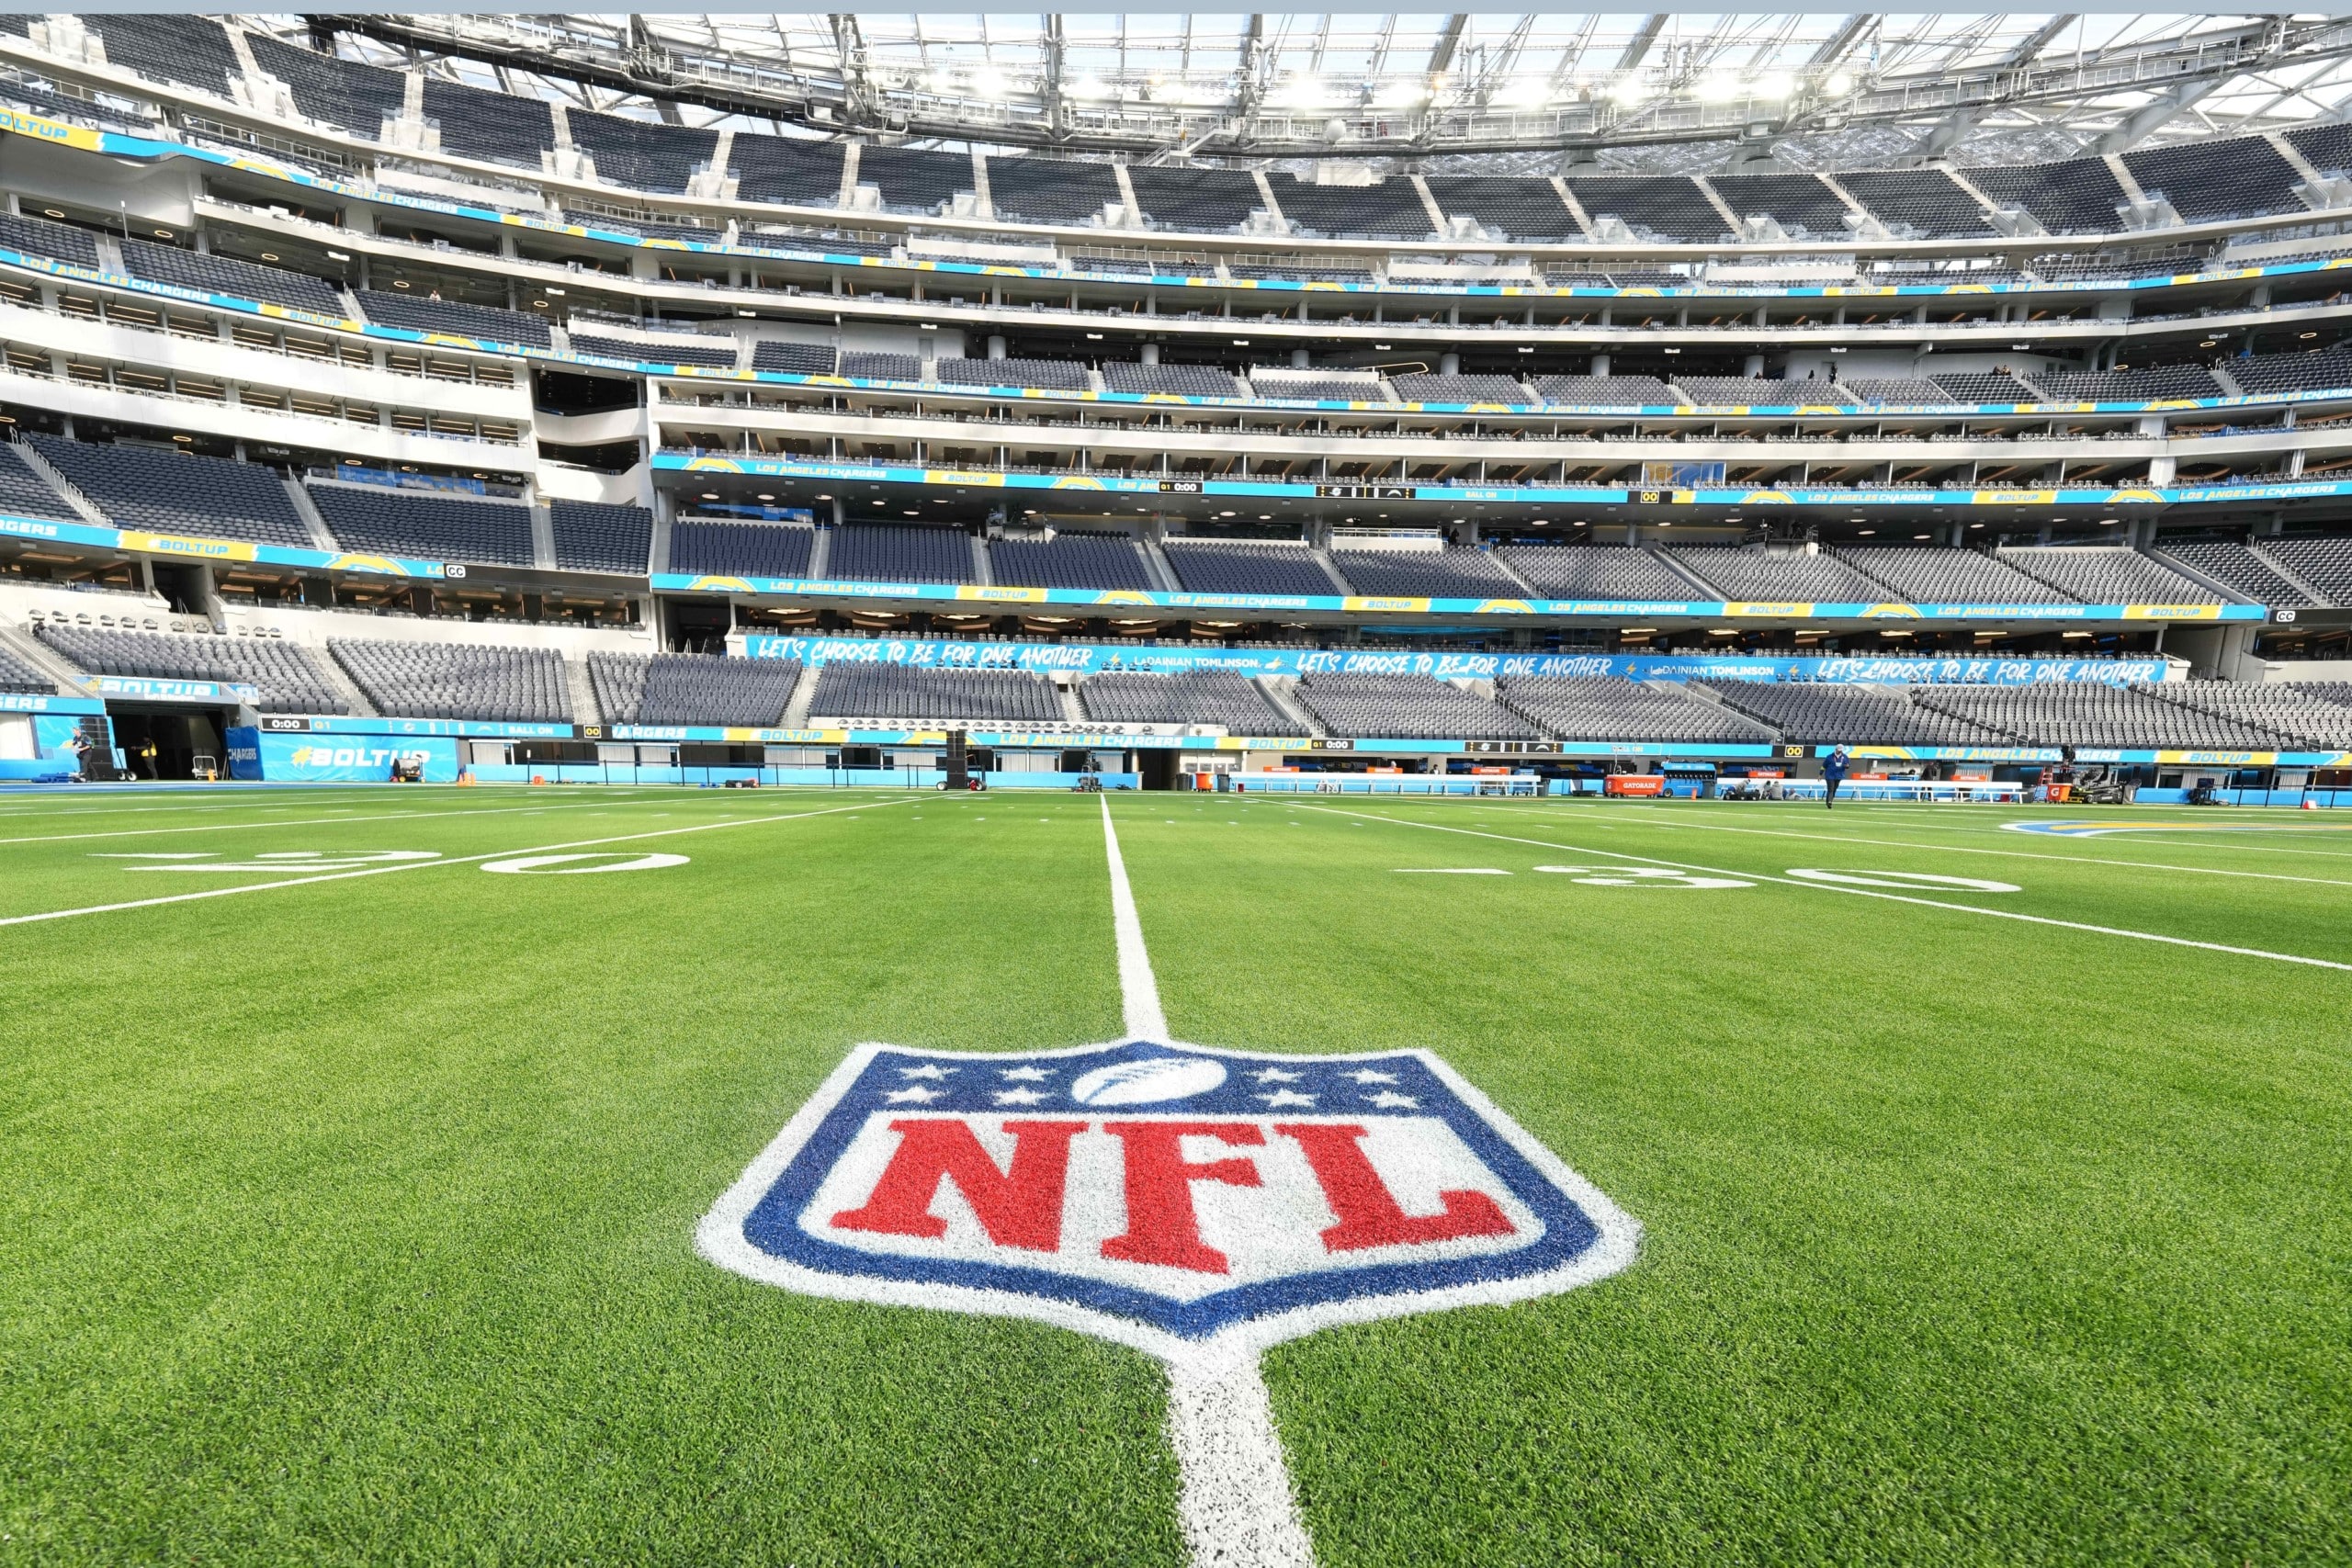 Apple remains 'front-runner' for NFL Sunday Ticket in 2023